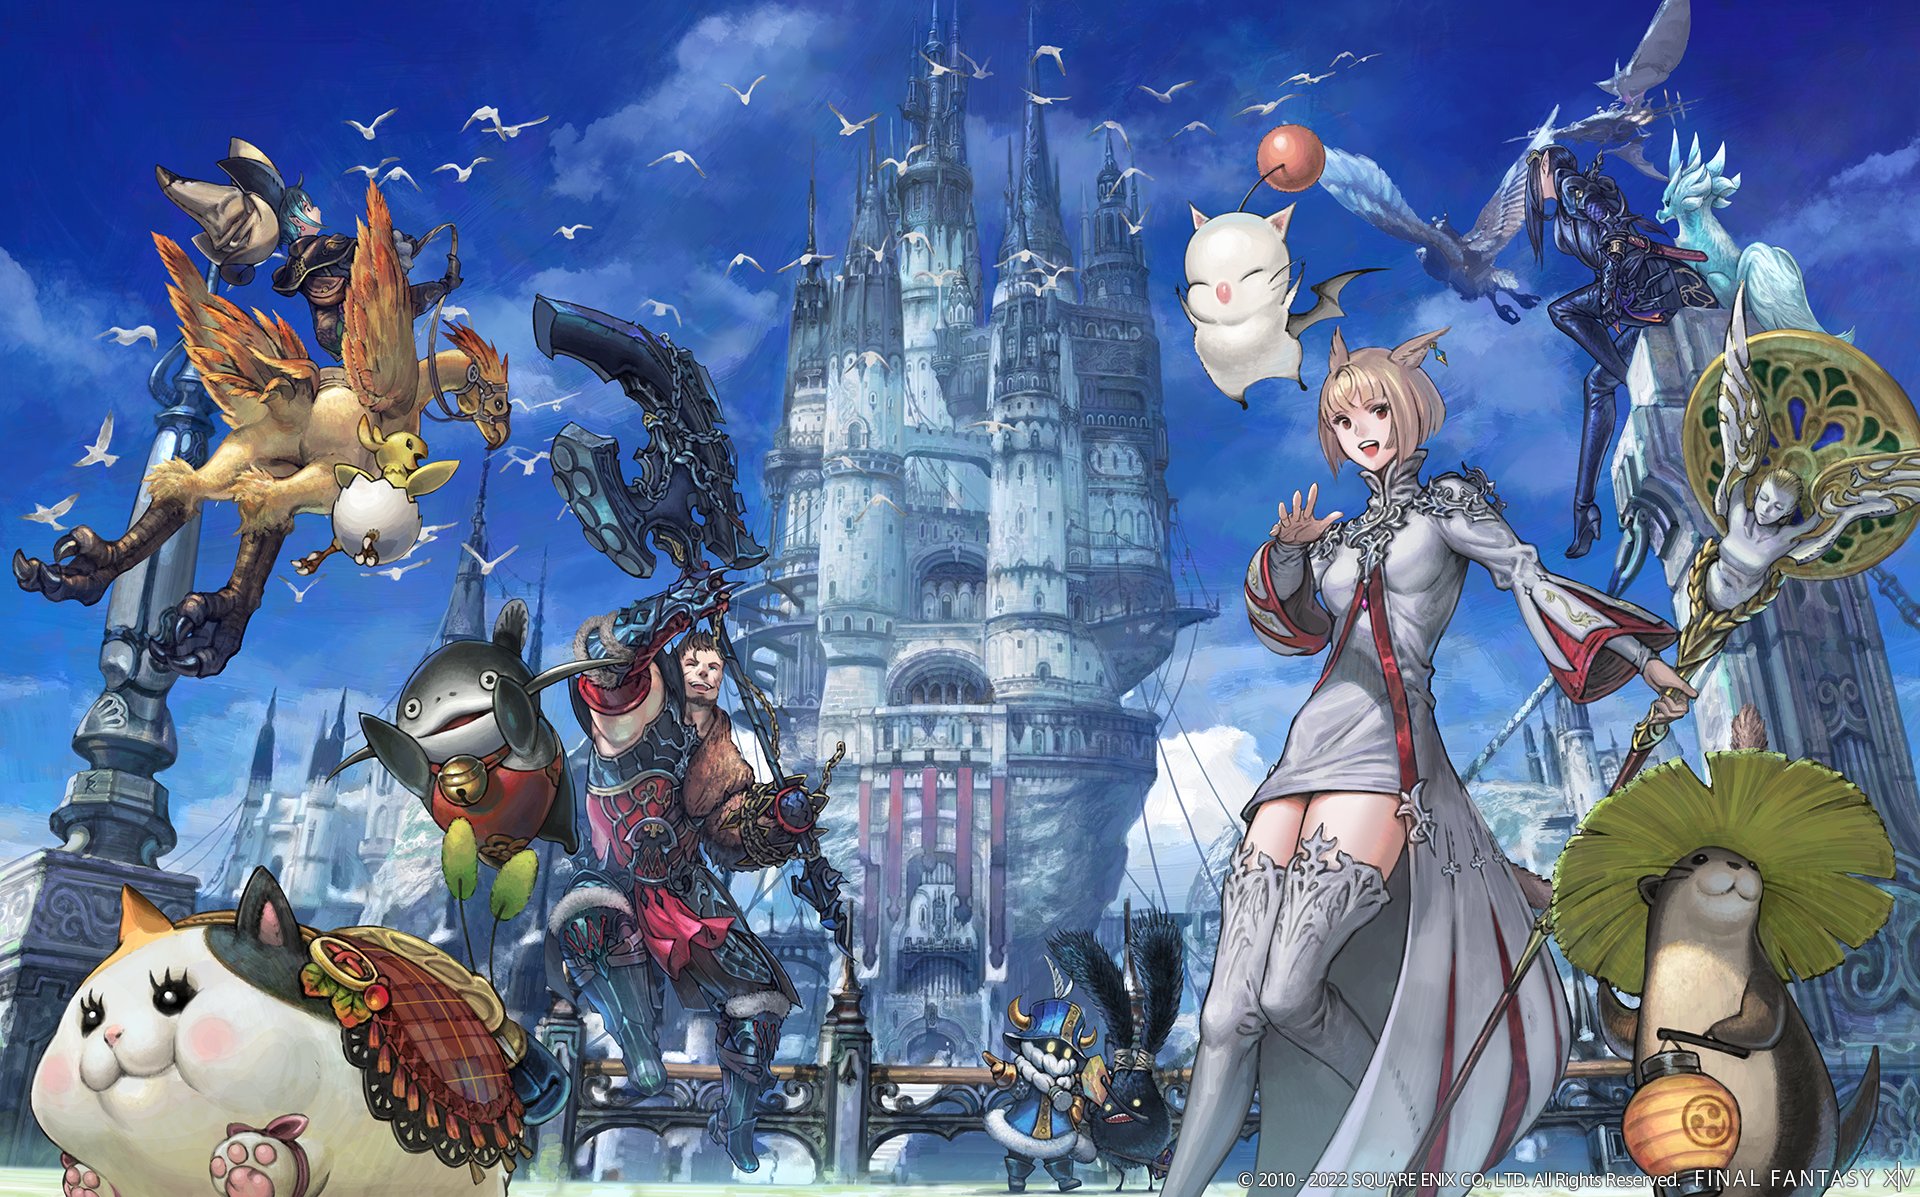 Final Fantasy XIV Opens Up the Free Trial Again